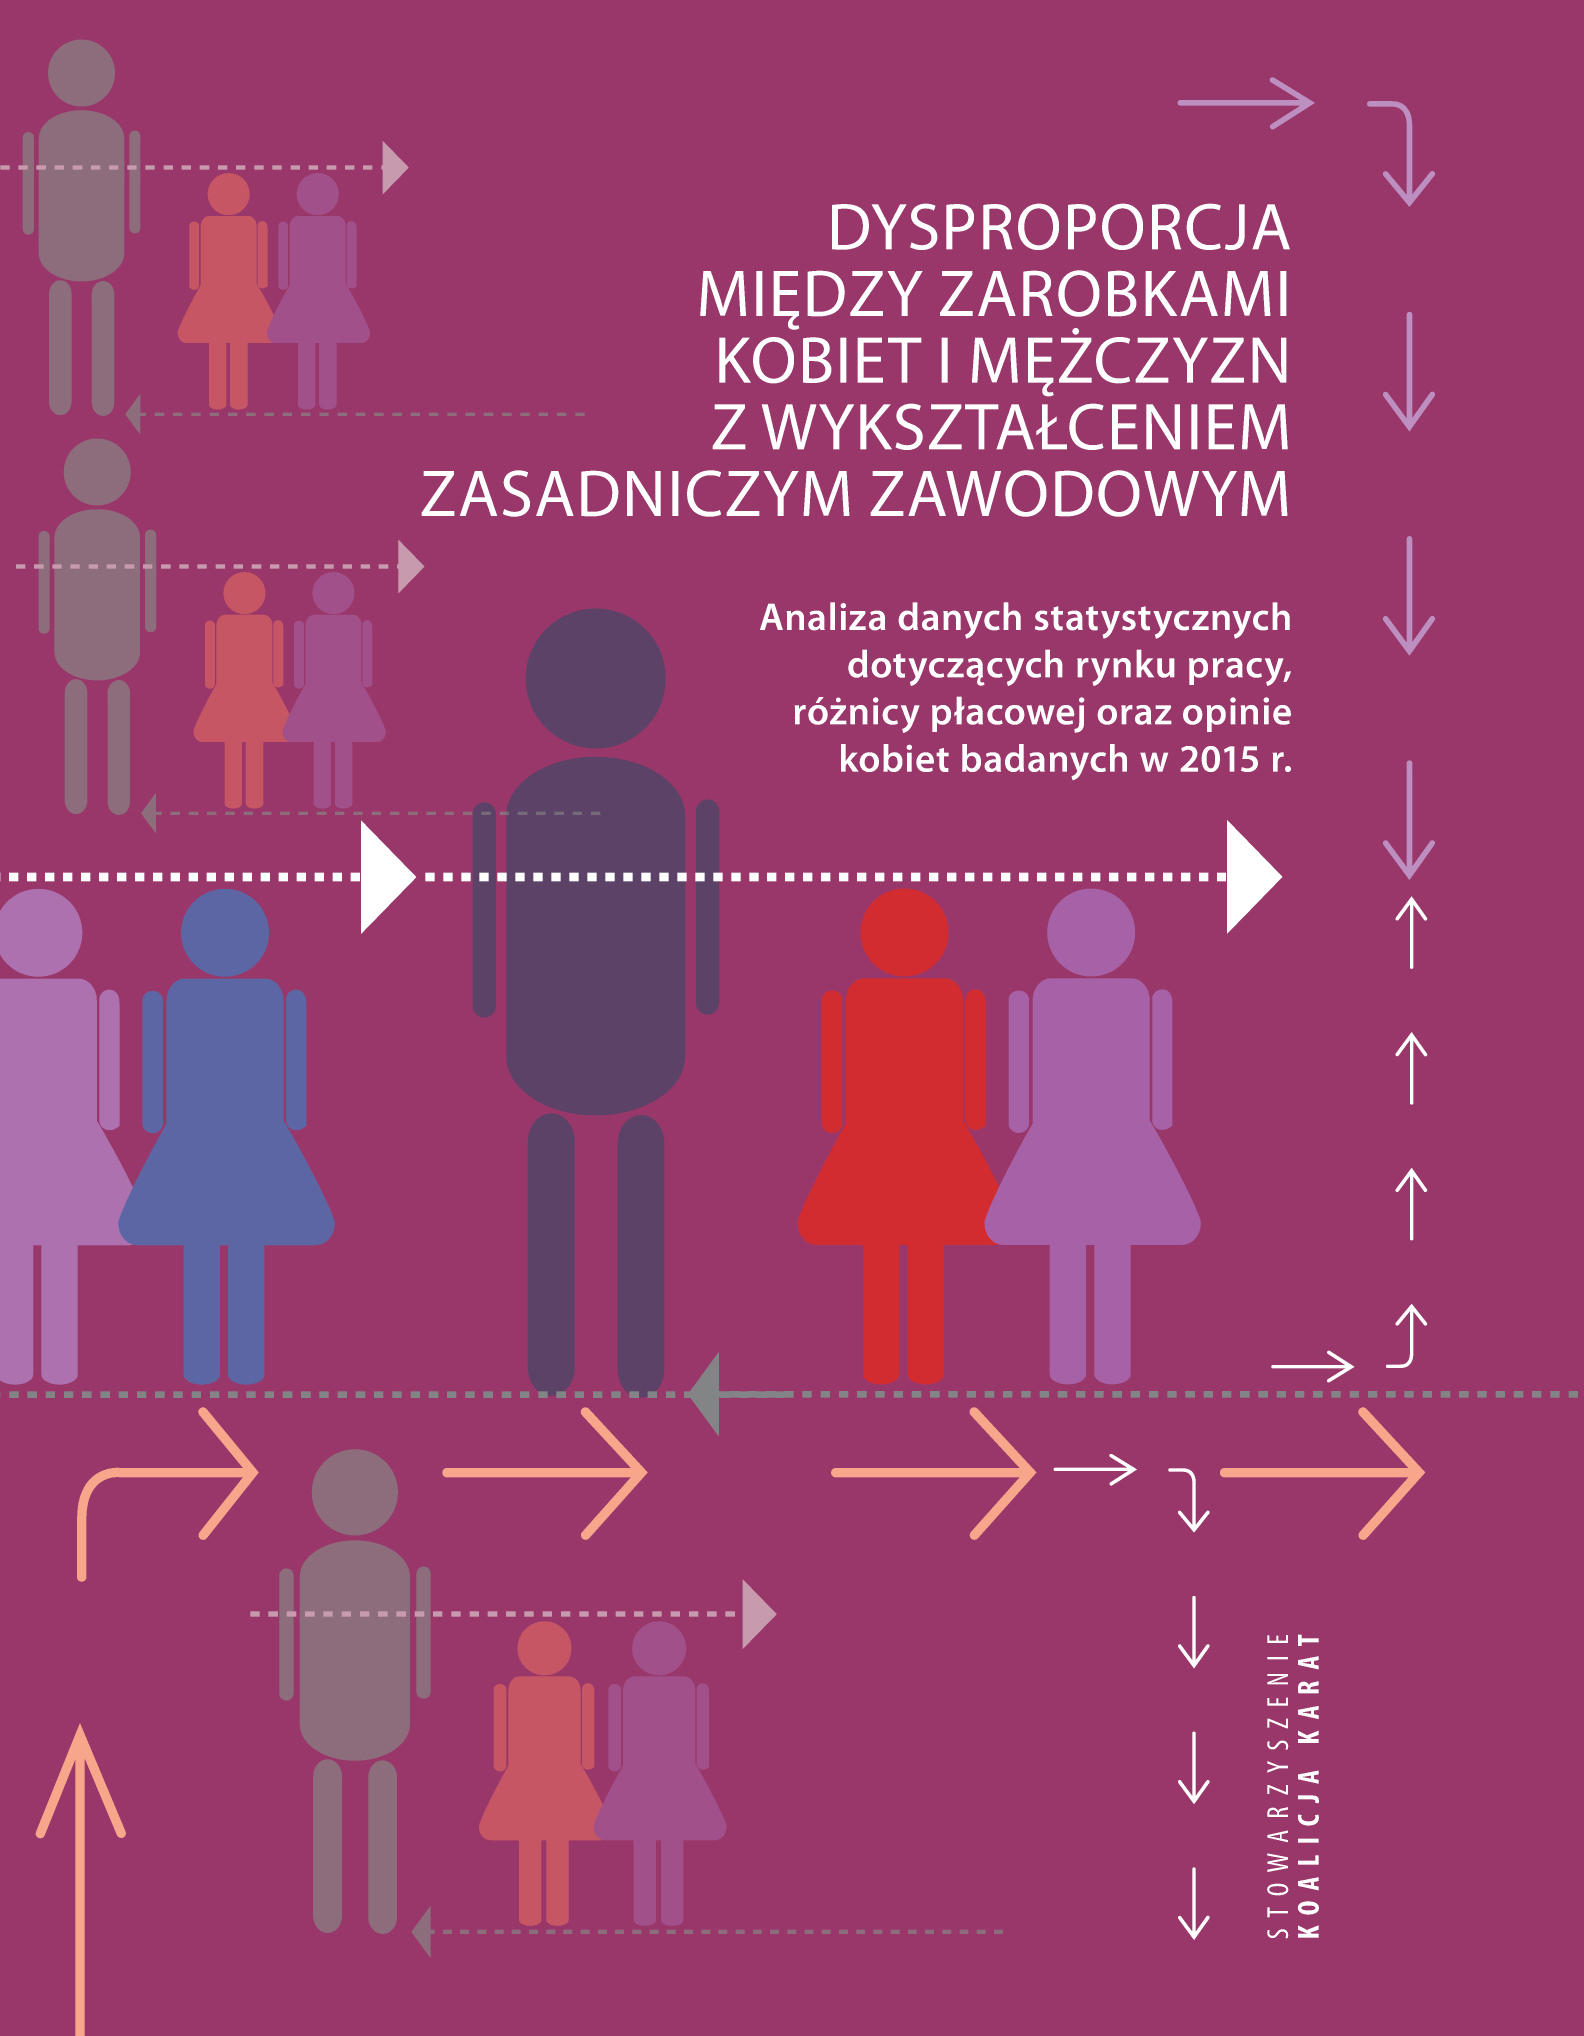 Report: Pay gap between women and men with basic vocational education 1